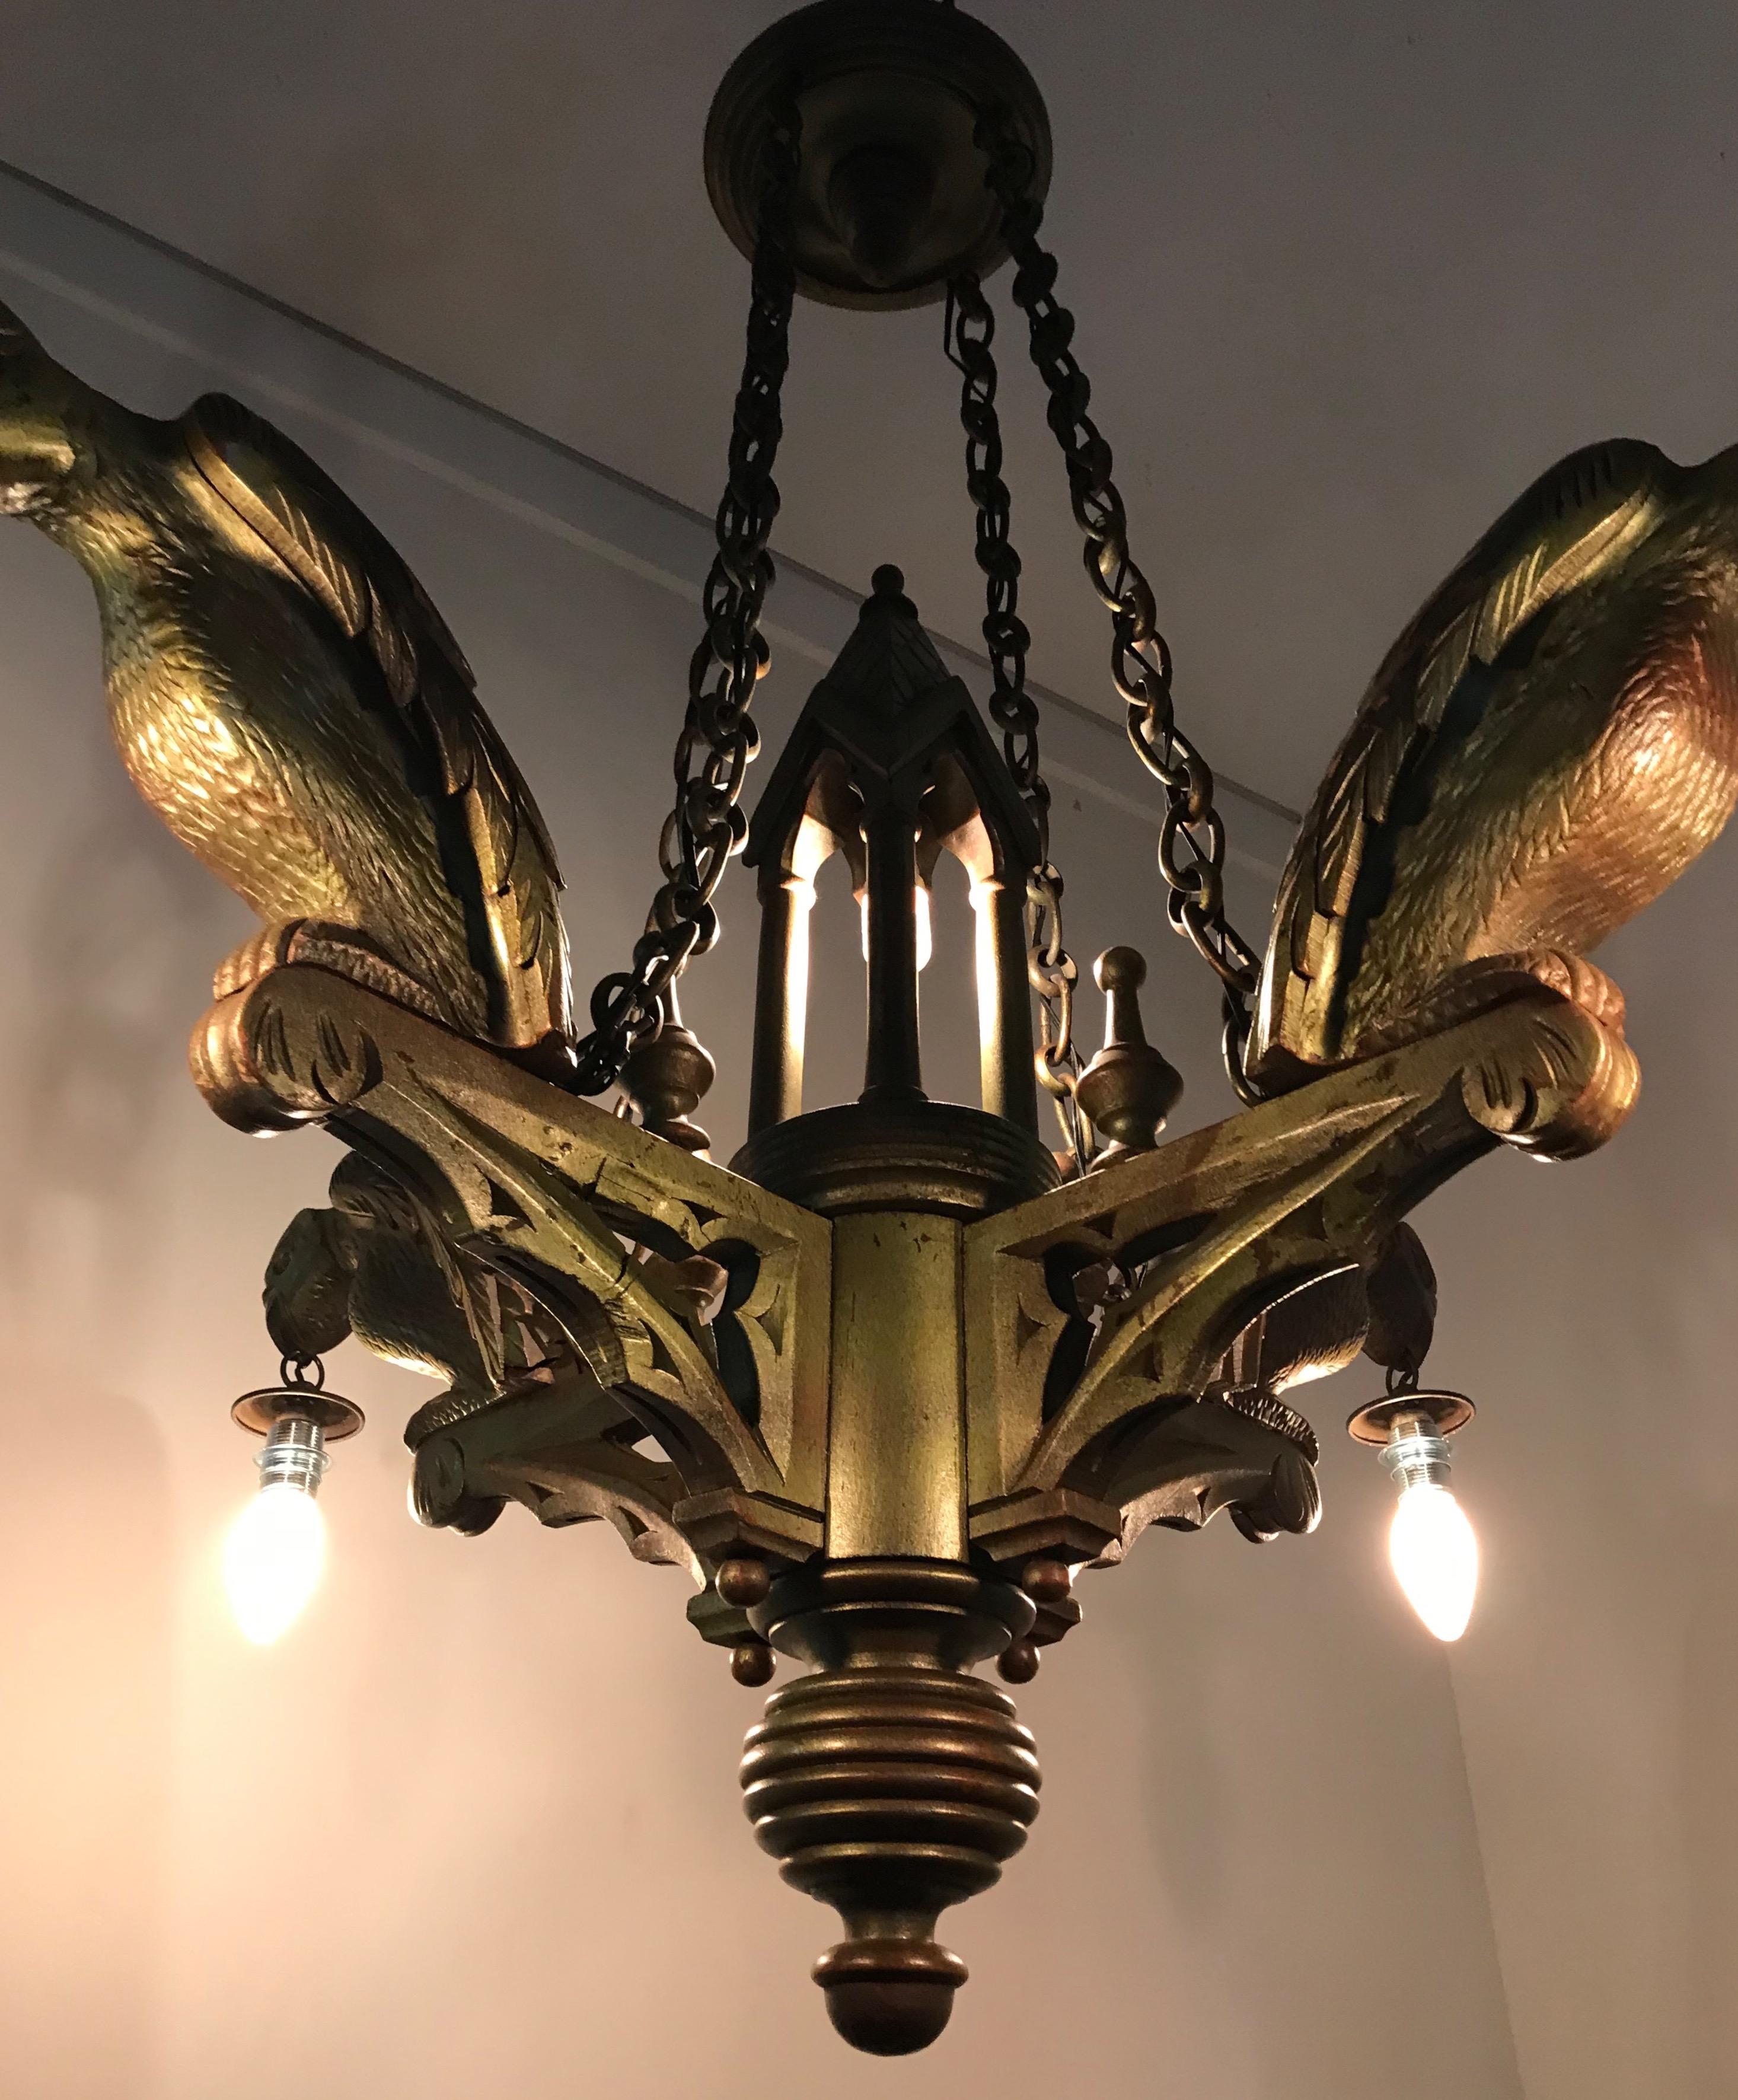 Rare Hand Carved Wooden Gothic Revival Art Chandelier with Gargoyle Sculptures For Sale 4